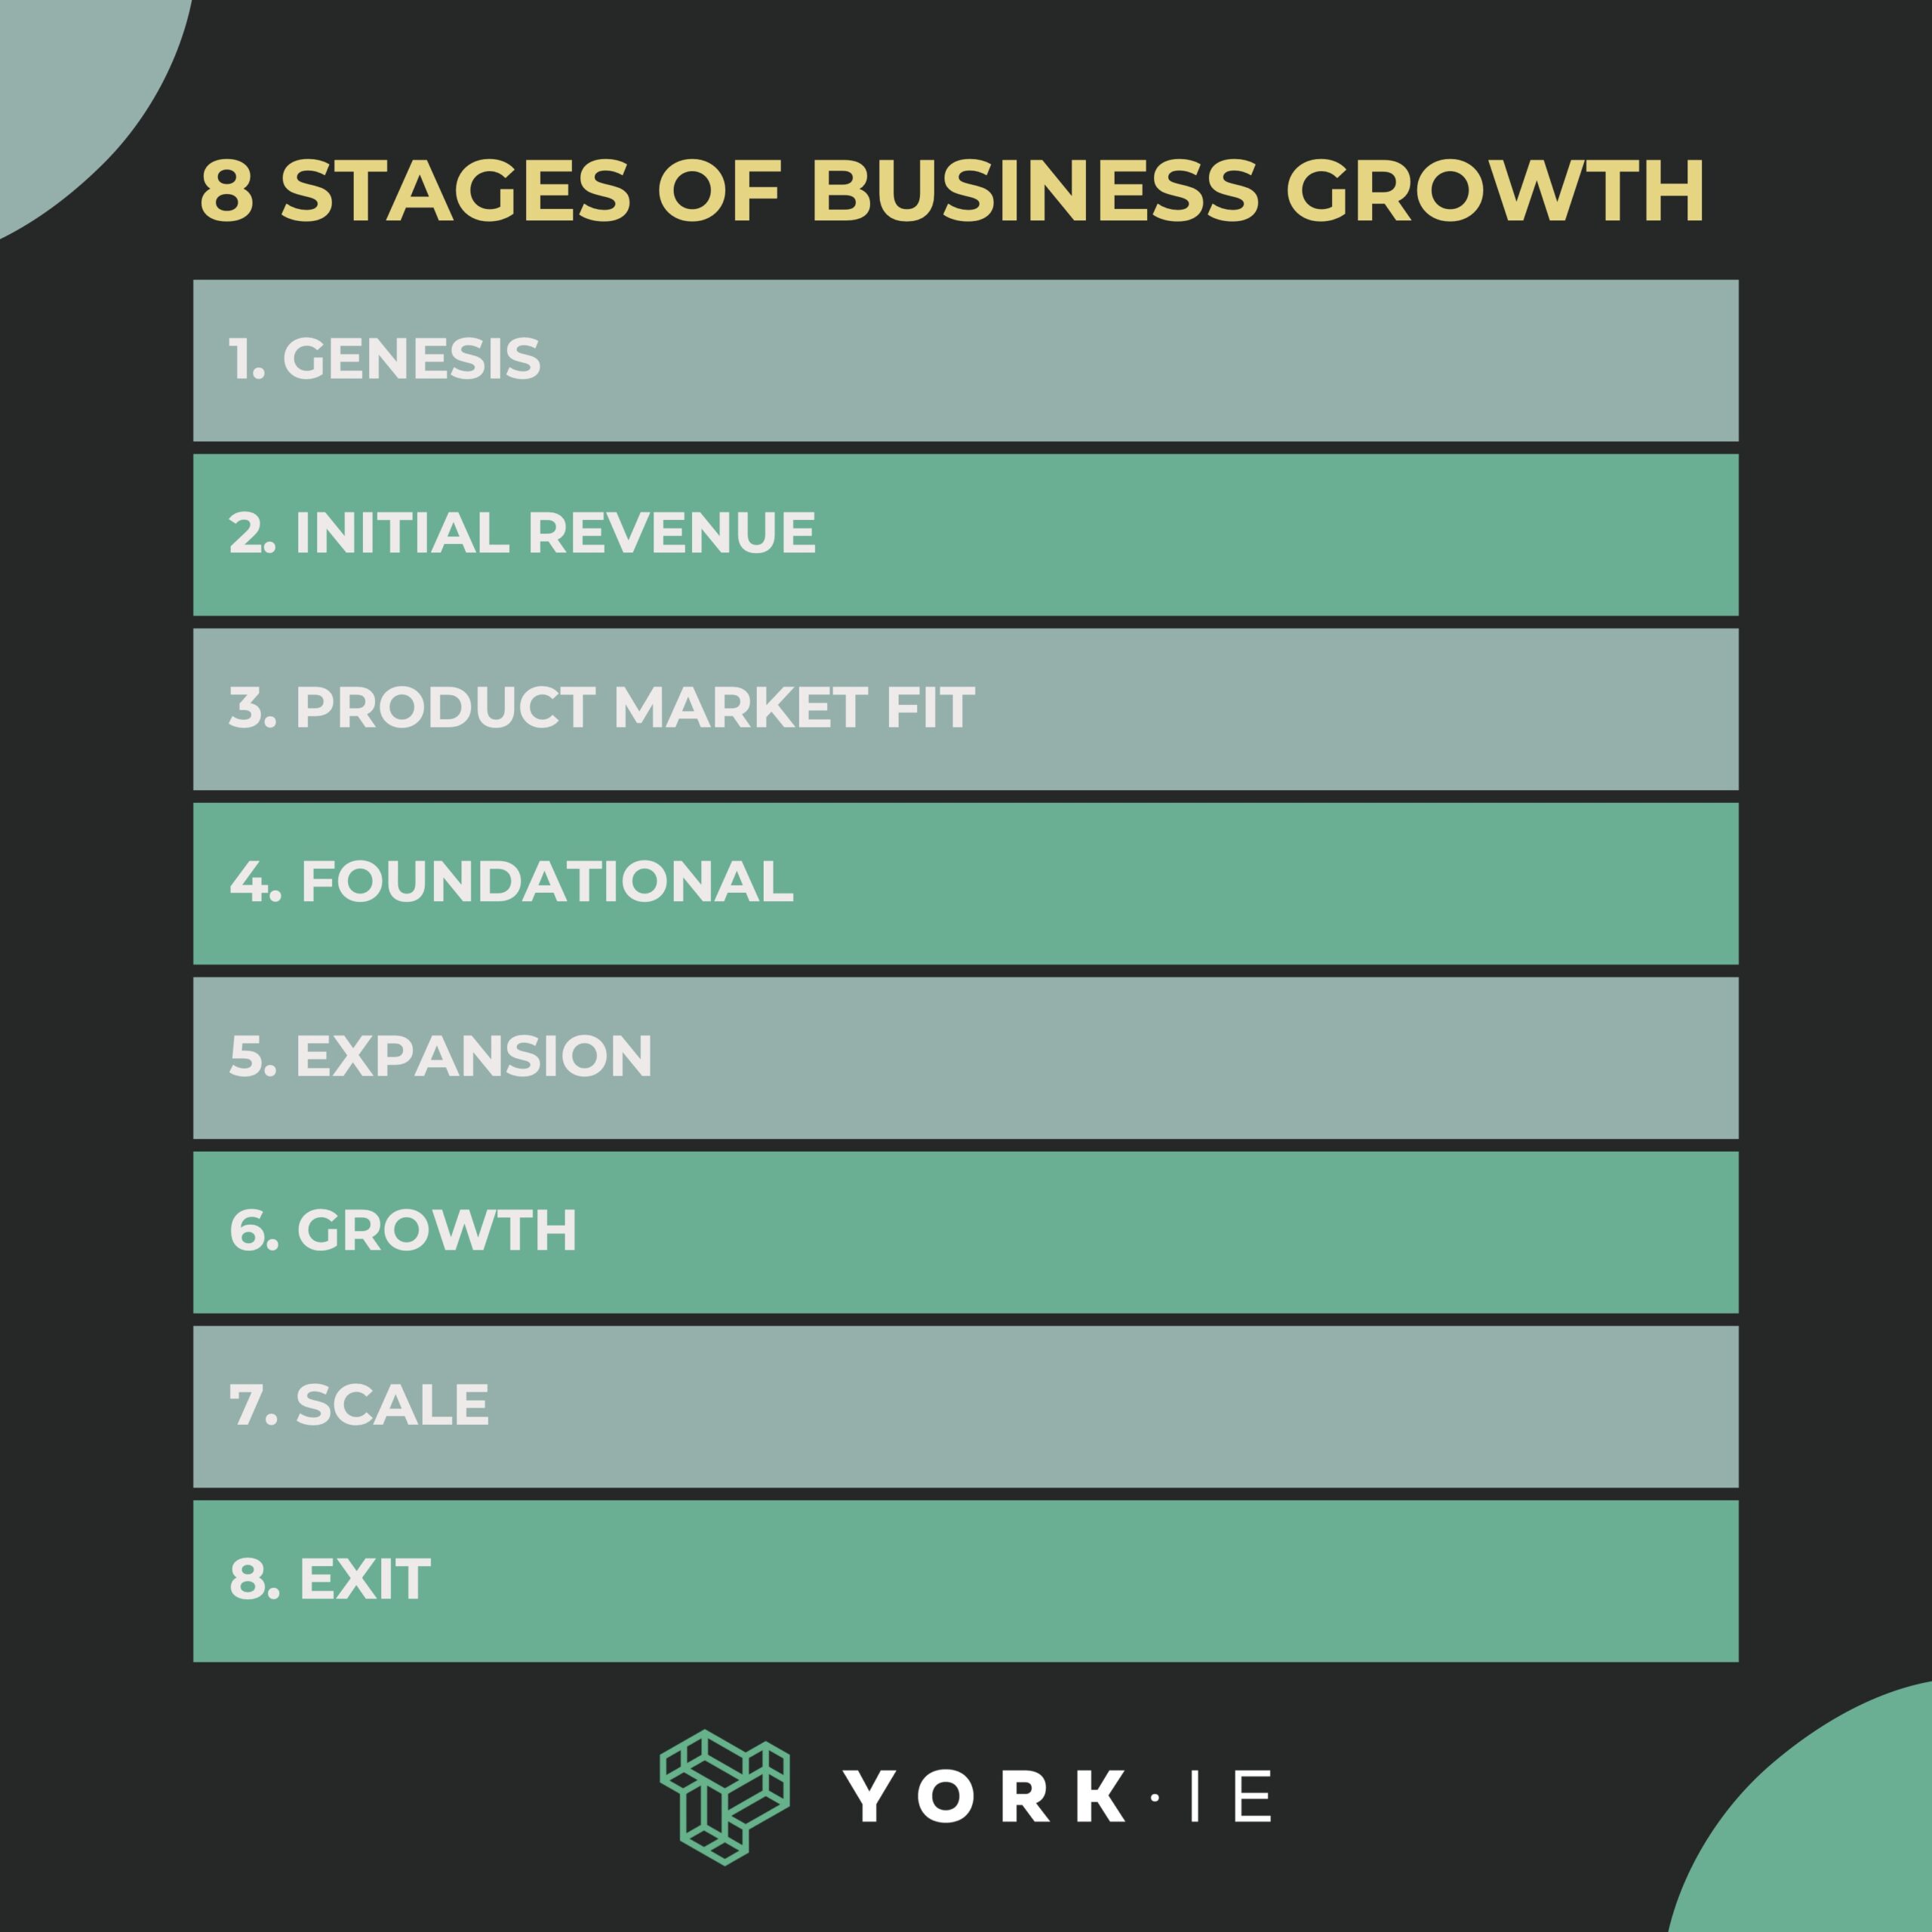 The eight stages of business growth: genesis, initial revenue, product market fit, foundational, expansion, growth, scale, exit.